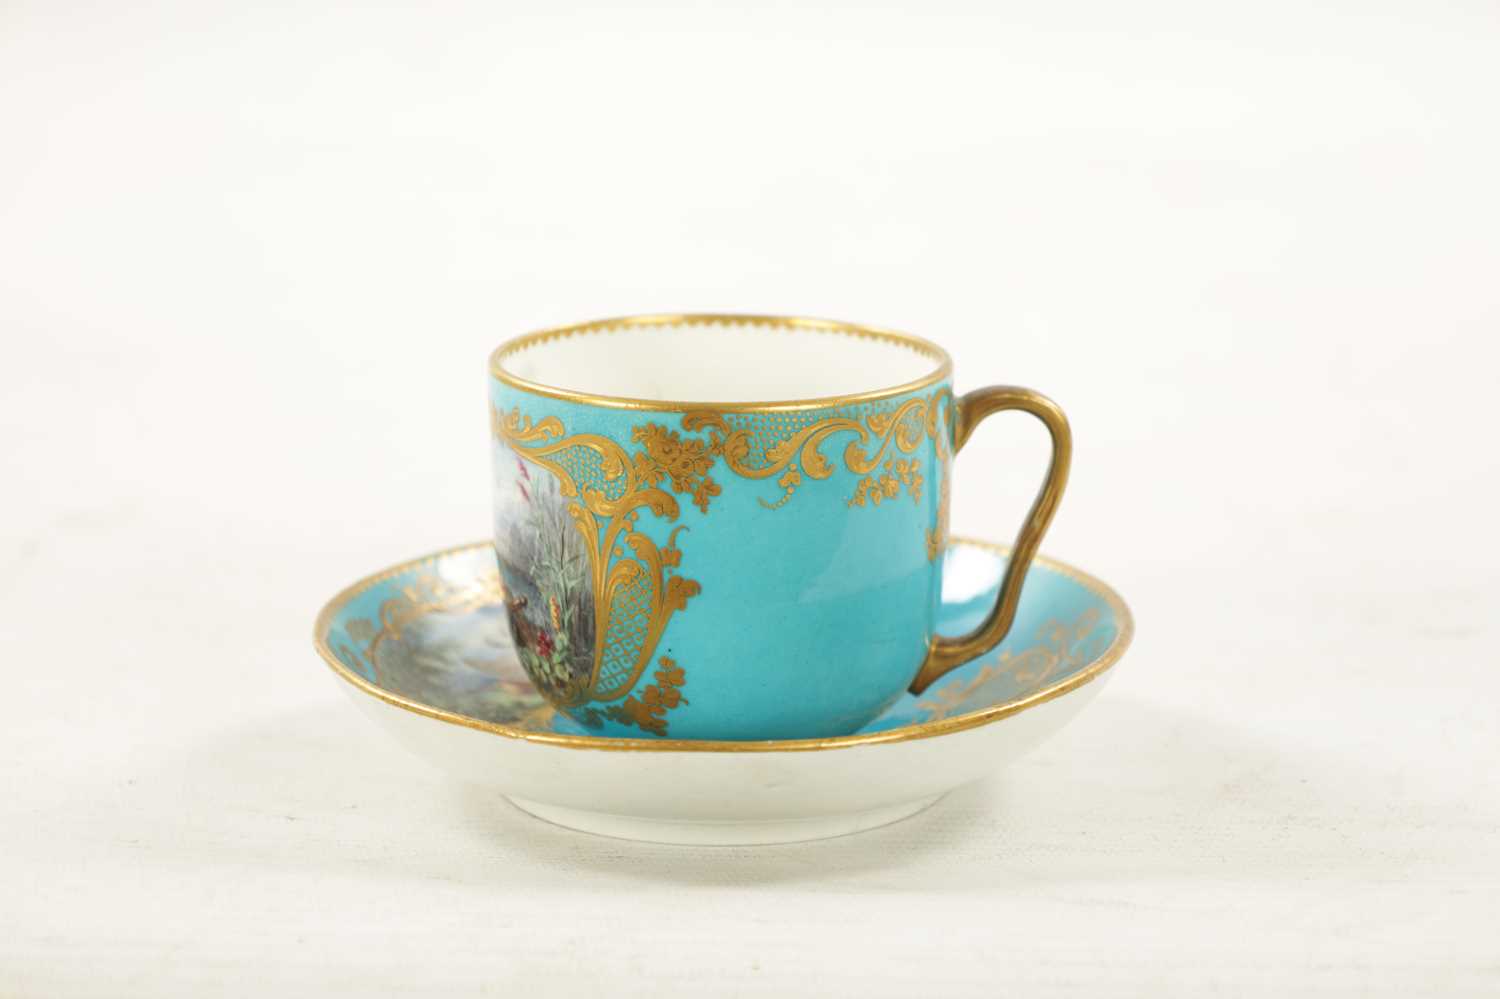 A FINE LATE 18TH / 19TH CENTURY SEVRES PORCELAIN CUP AND SAUCER - Image 4 of 13